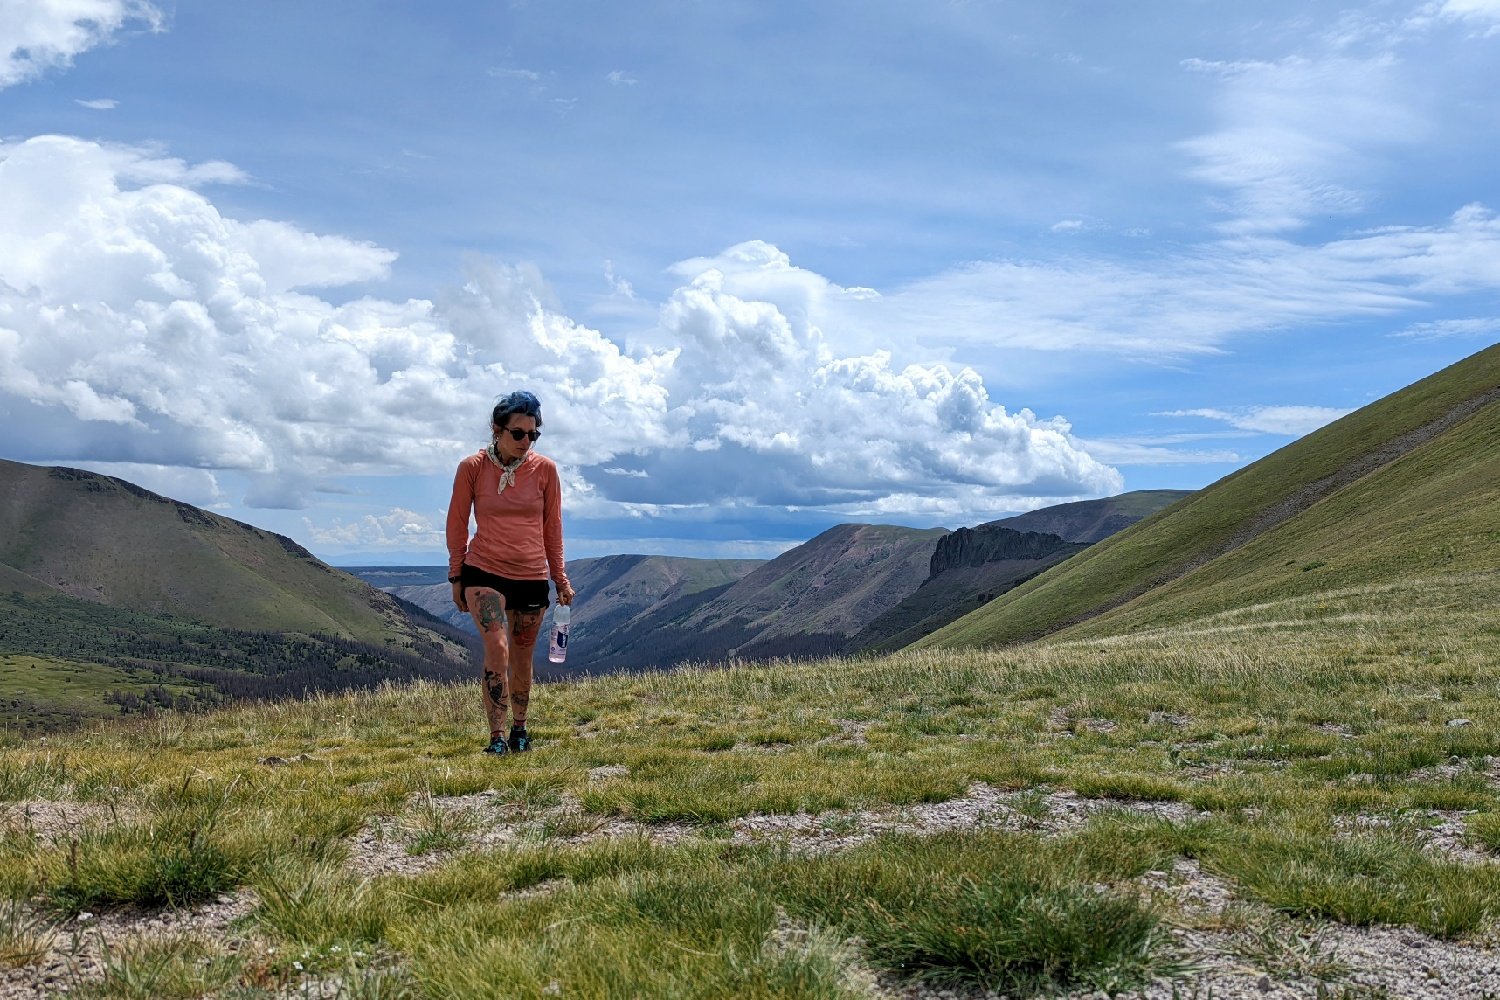 A hiker at the top of a mountain pass on the Colorado Trail